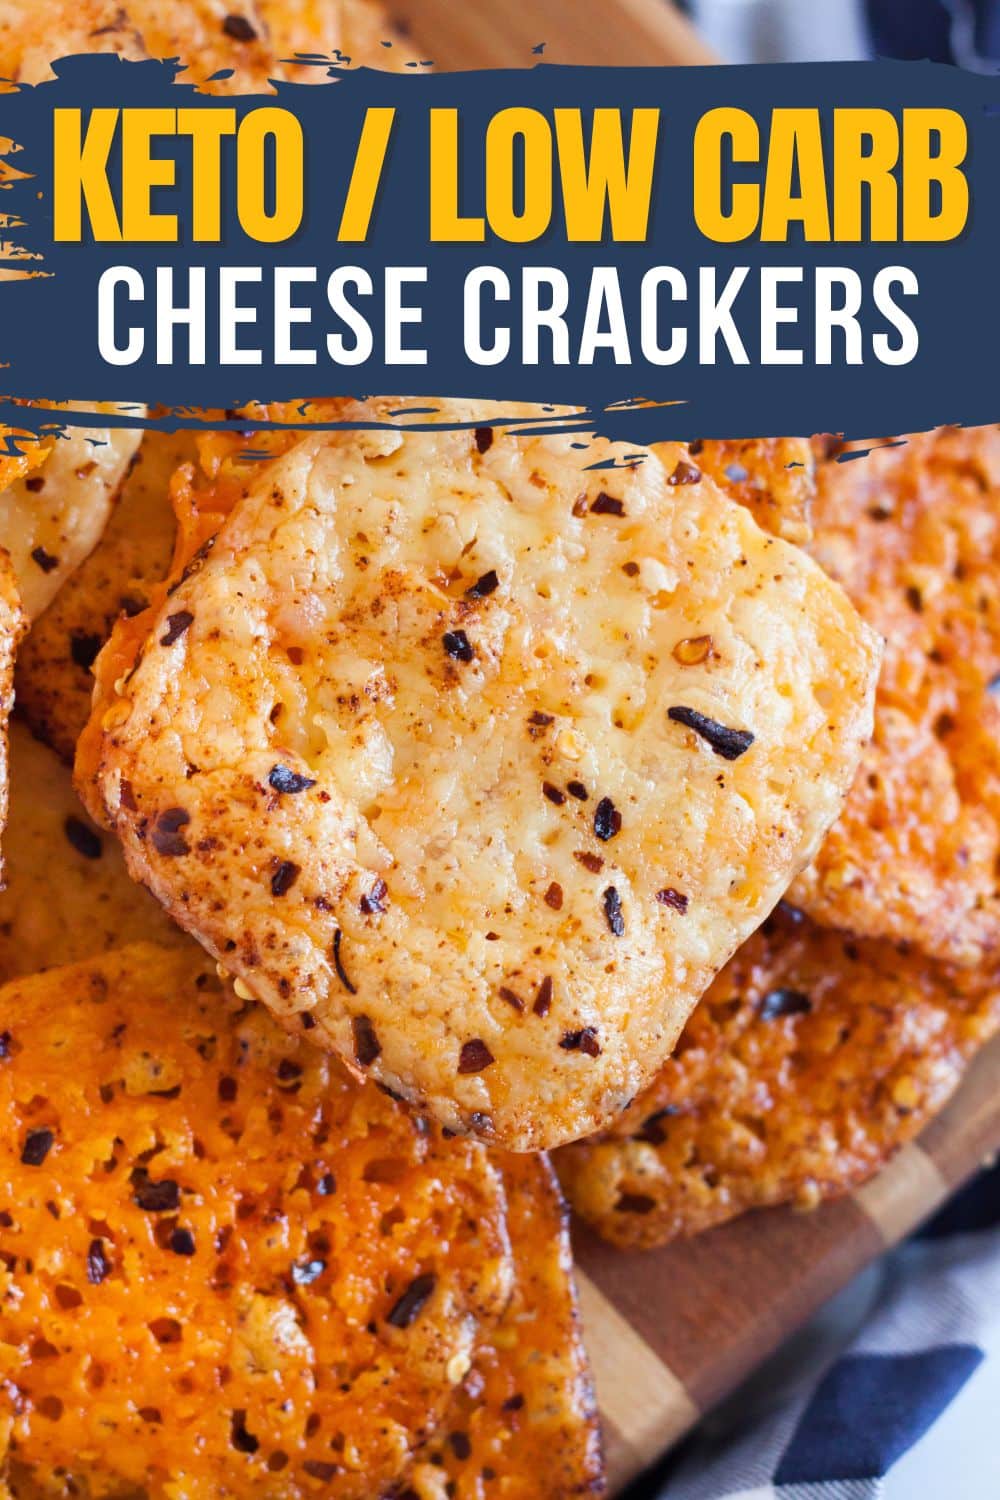 Hero image of diy keto cheese crackers with blue banner and yellow and white lettering